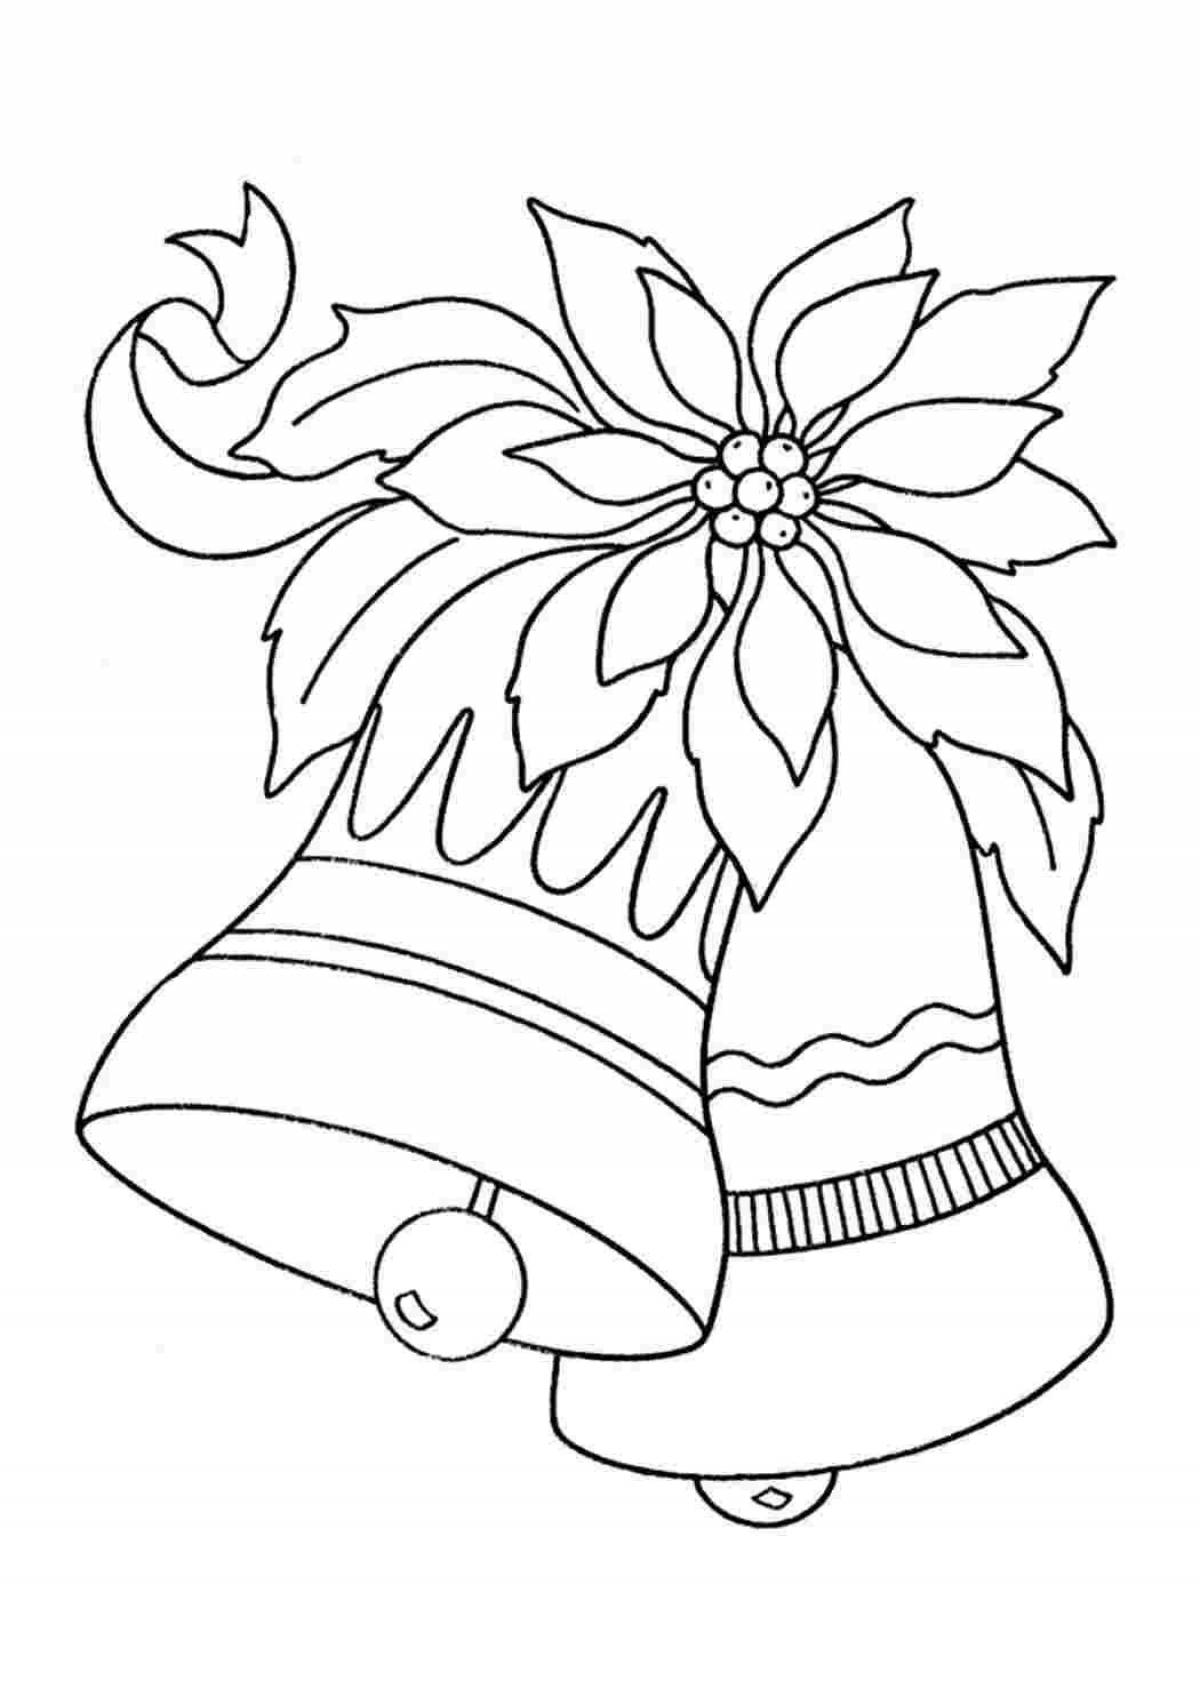 Rainbow Christmas bell coloring page